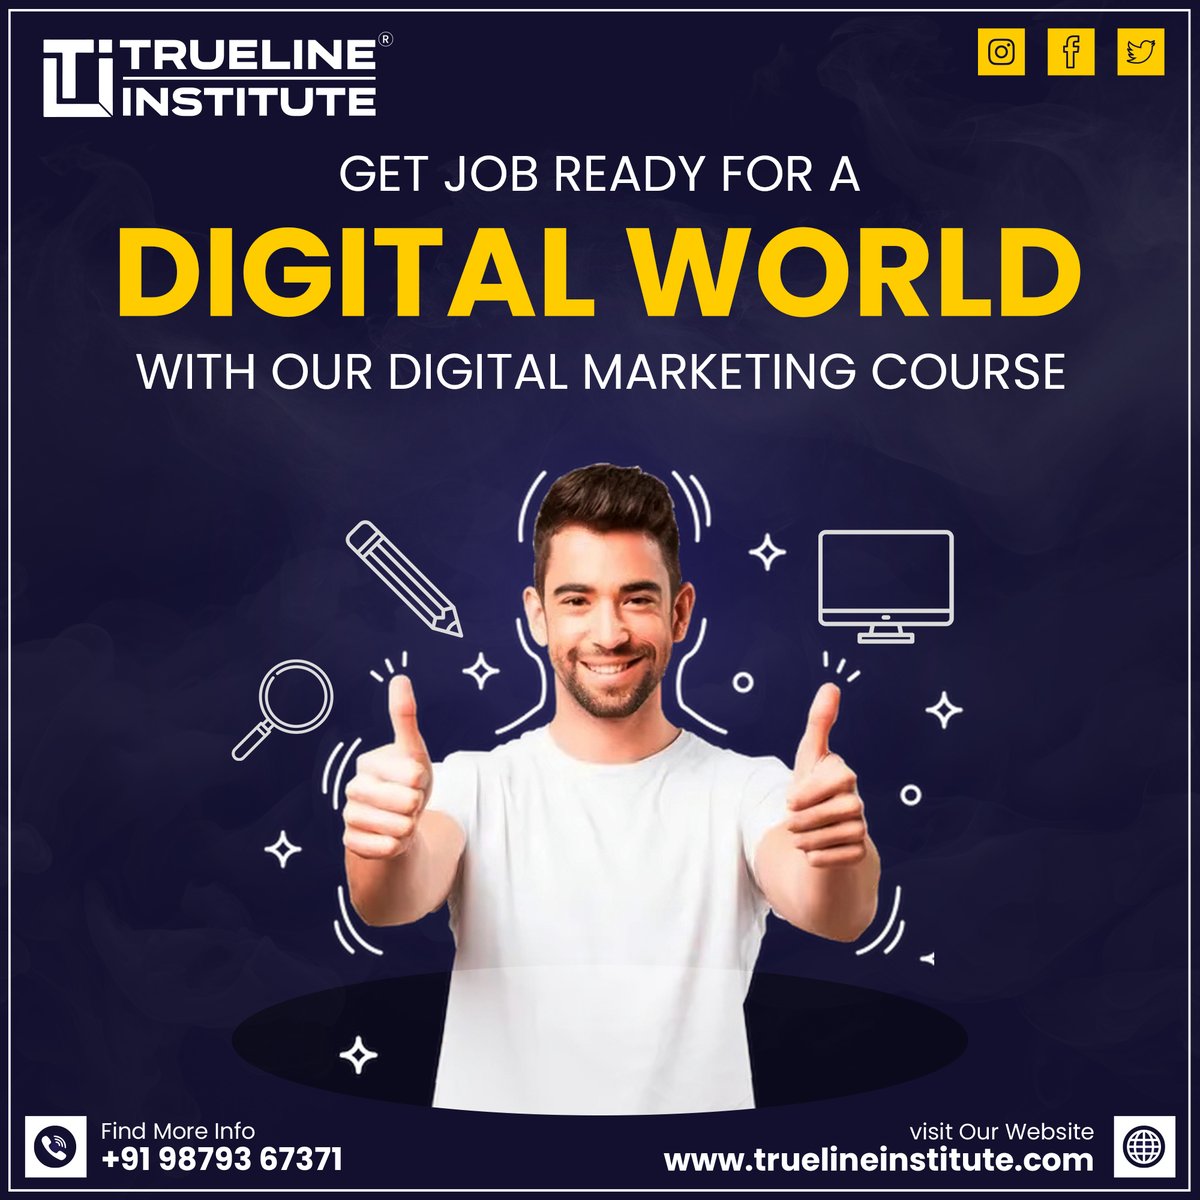 📢Get Job Ready For A Digital World With Our Digital Marketing Course | Trueline Institute
☎️ +91 98793 67371
🌐truelineinstitute.com
📧truelineinstitute@gmail.com
#truelineinstitute #institute #itcourses #designcreative #traningexcellence #besteducation #digitalmarketing